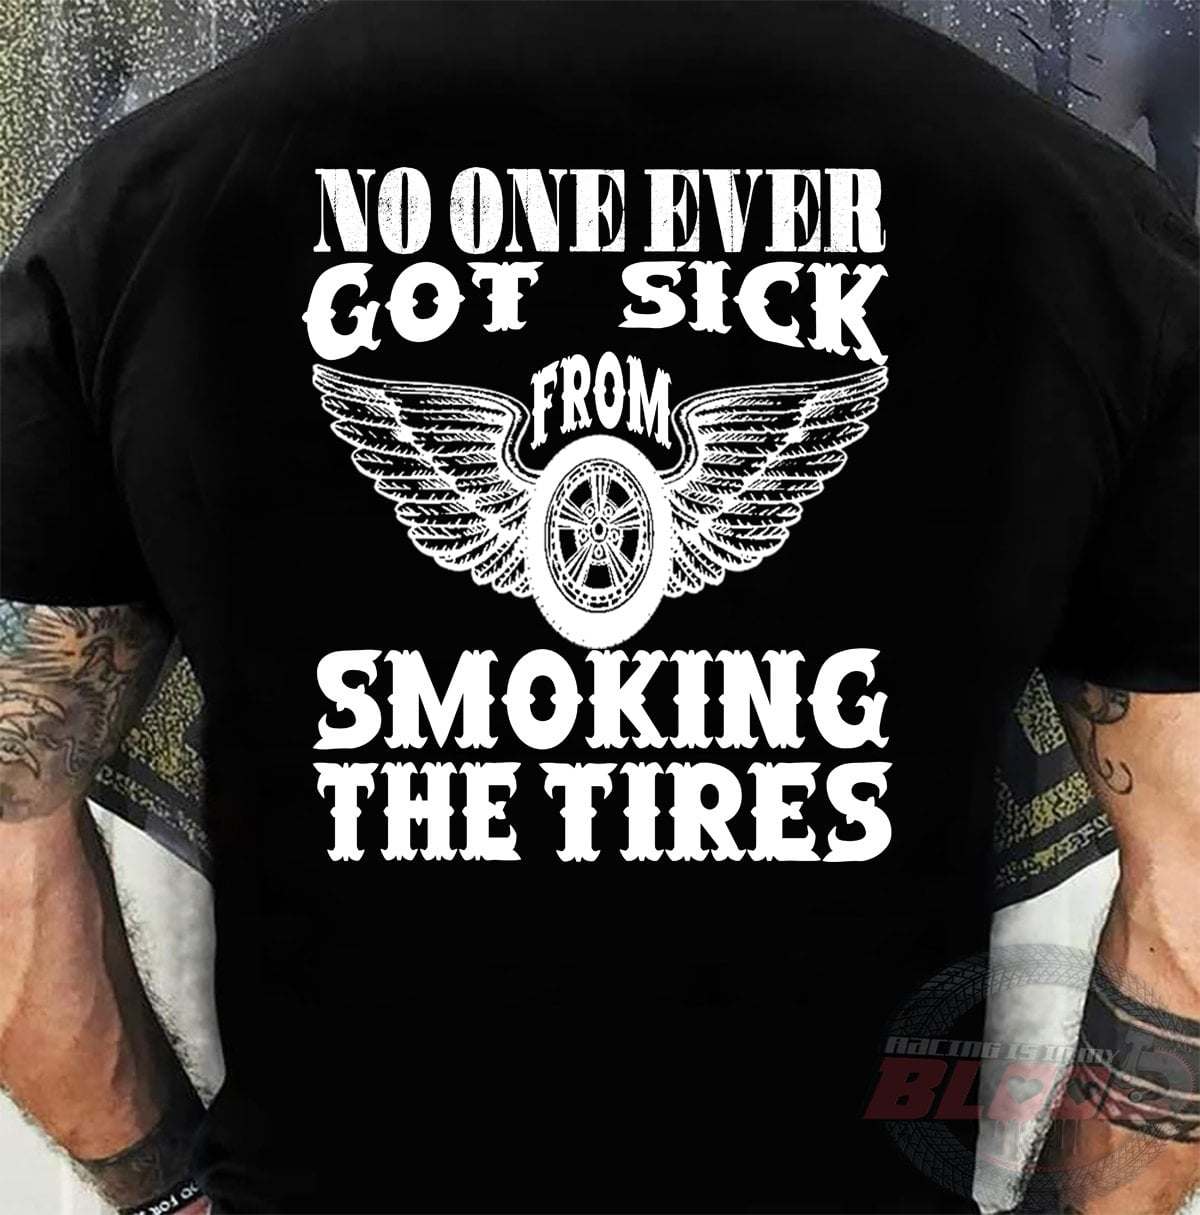 No one ever got sick from smoking the tires - Truck driver